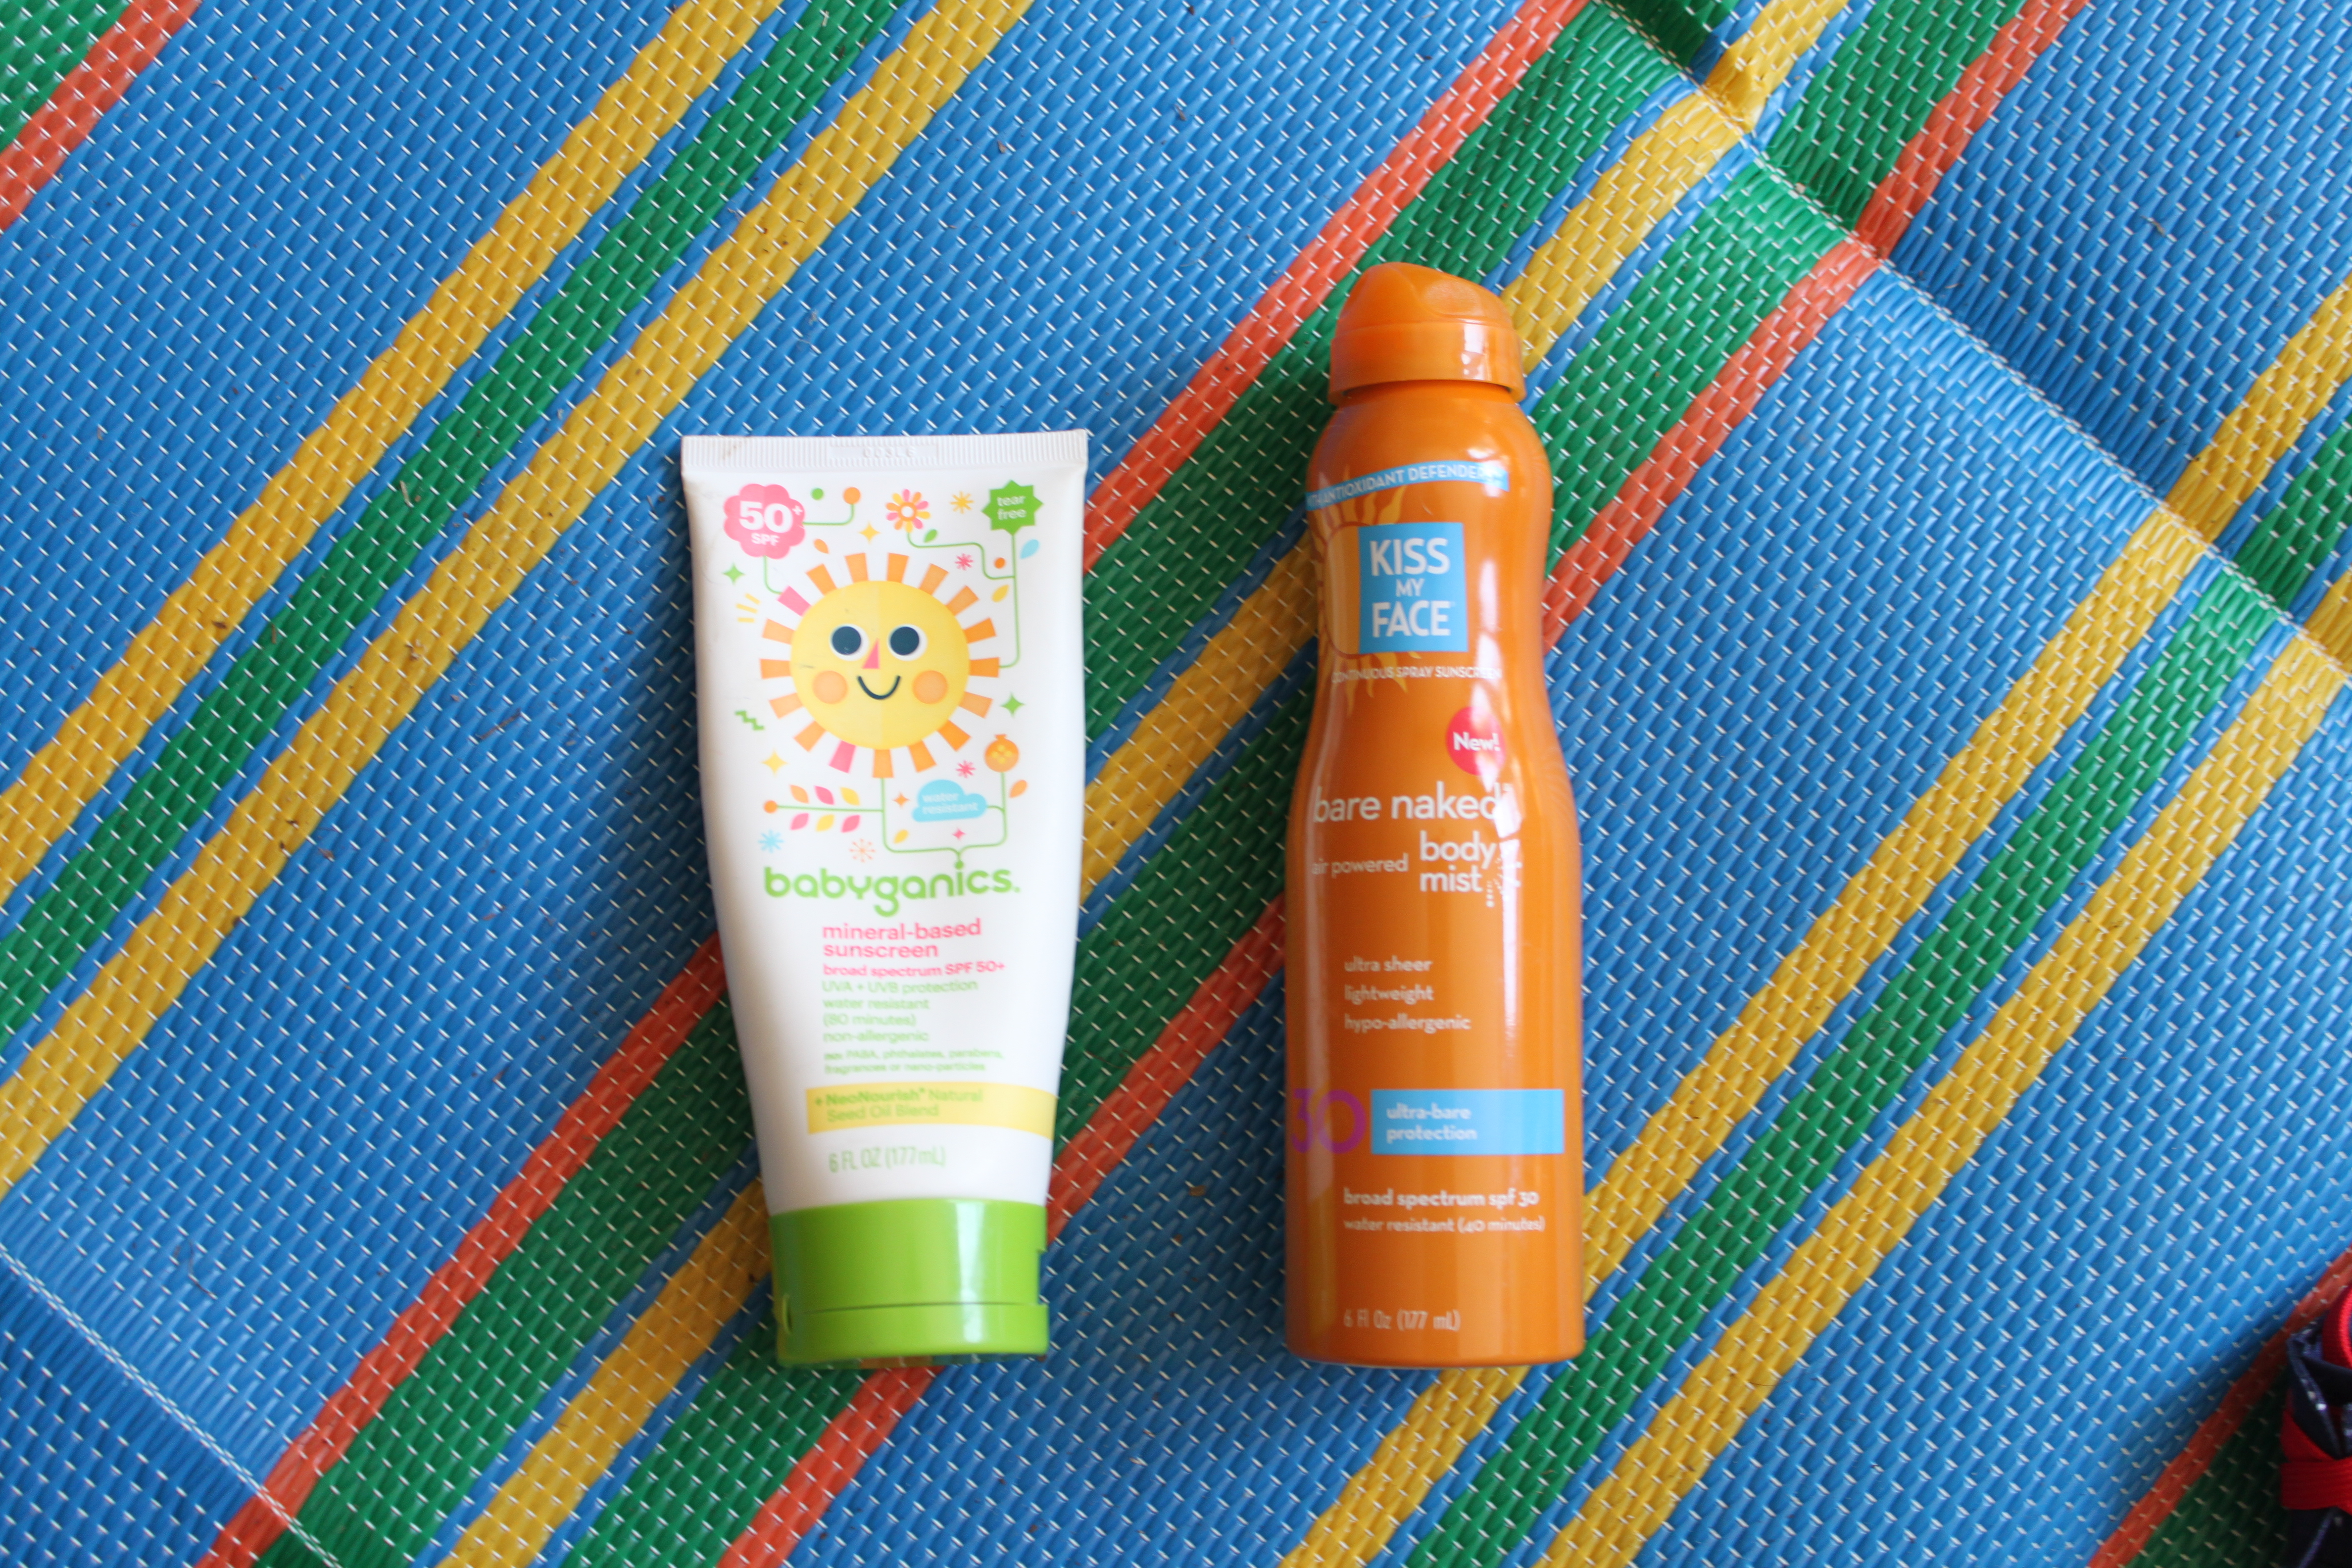 summer essentials for mom and toddler for parks, beach, and pool. Sunscreen, skin and hair products